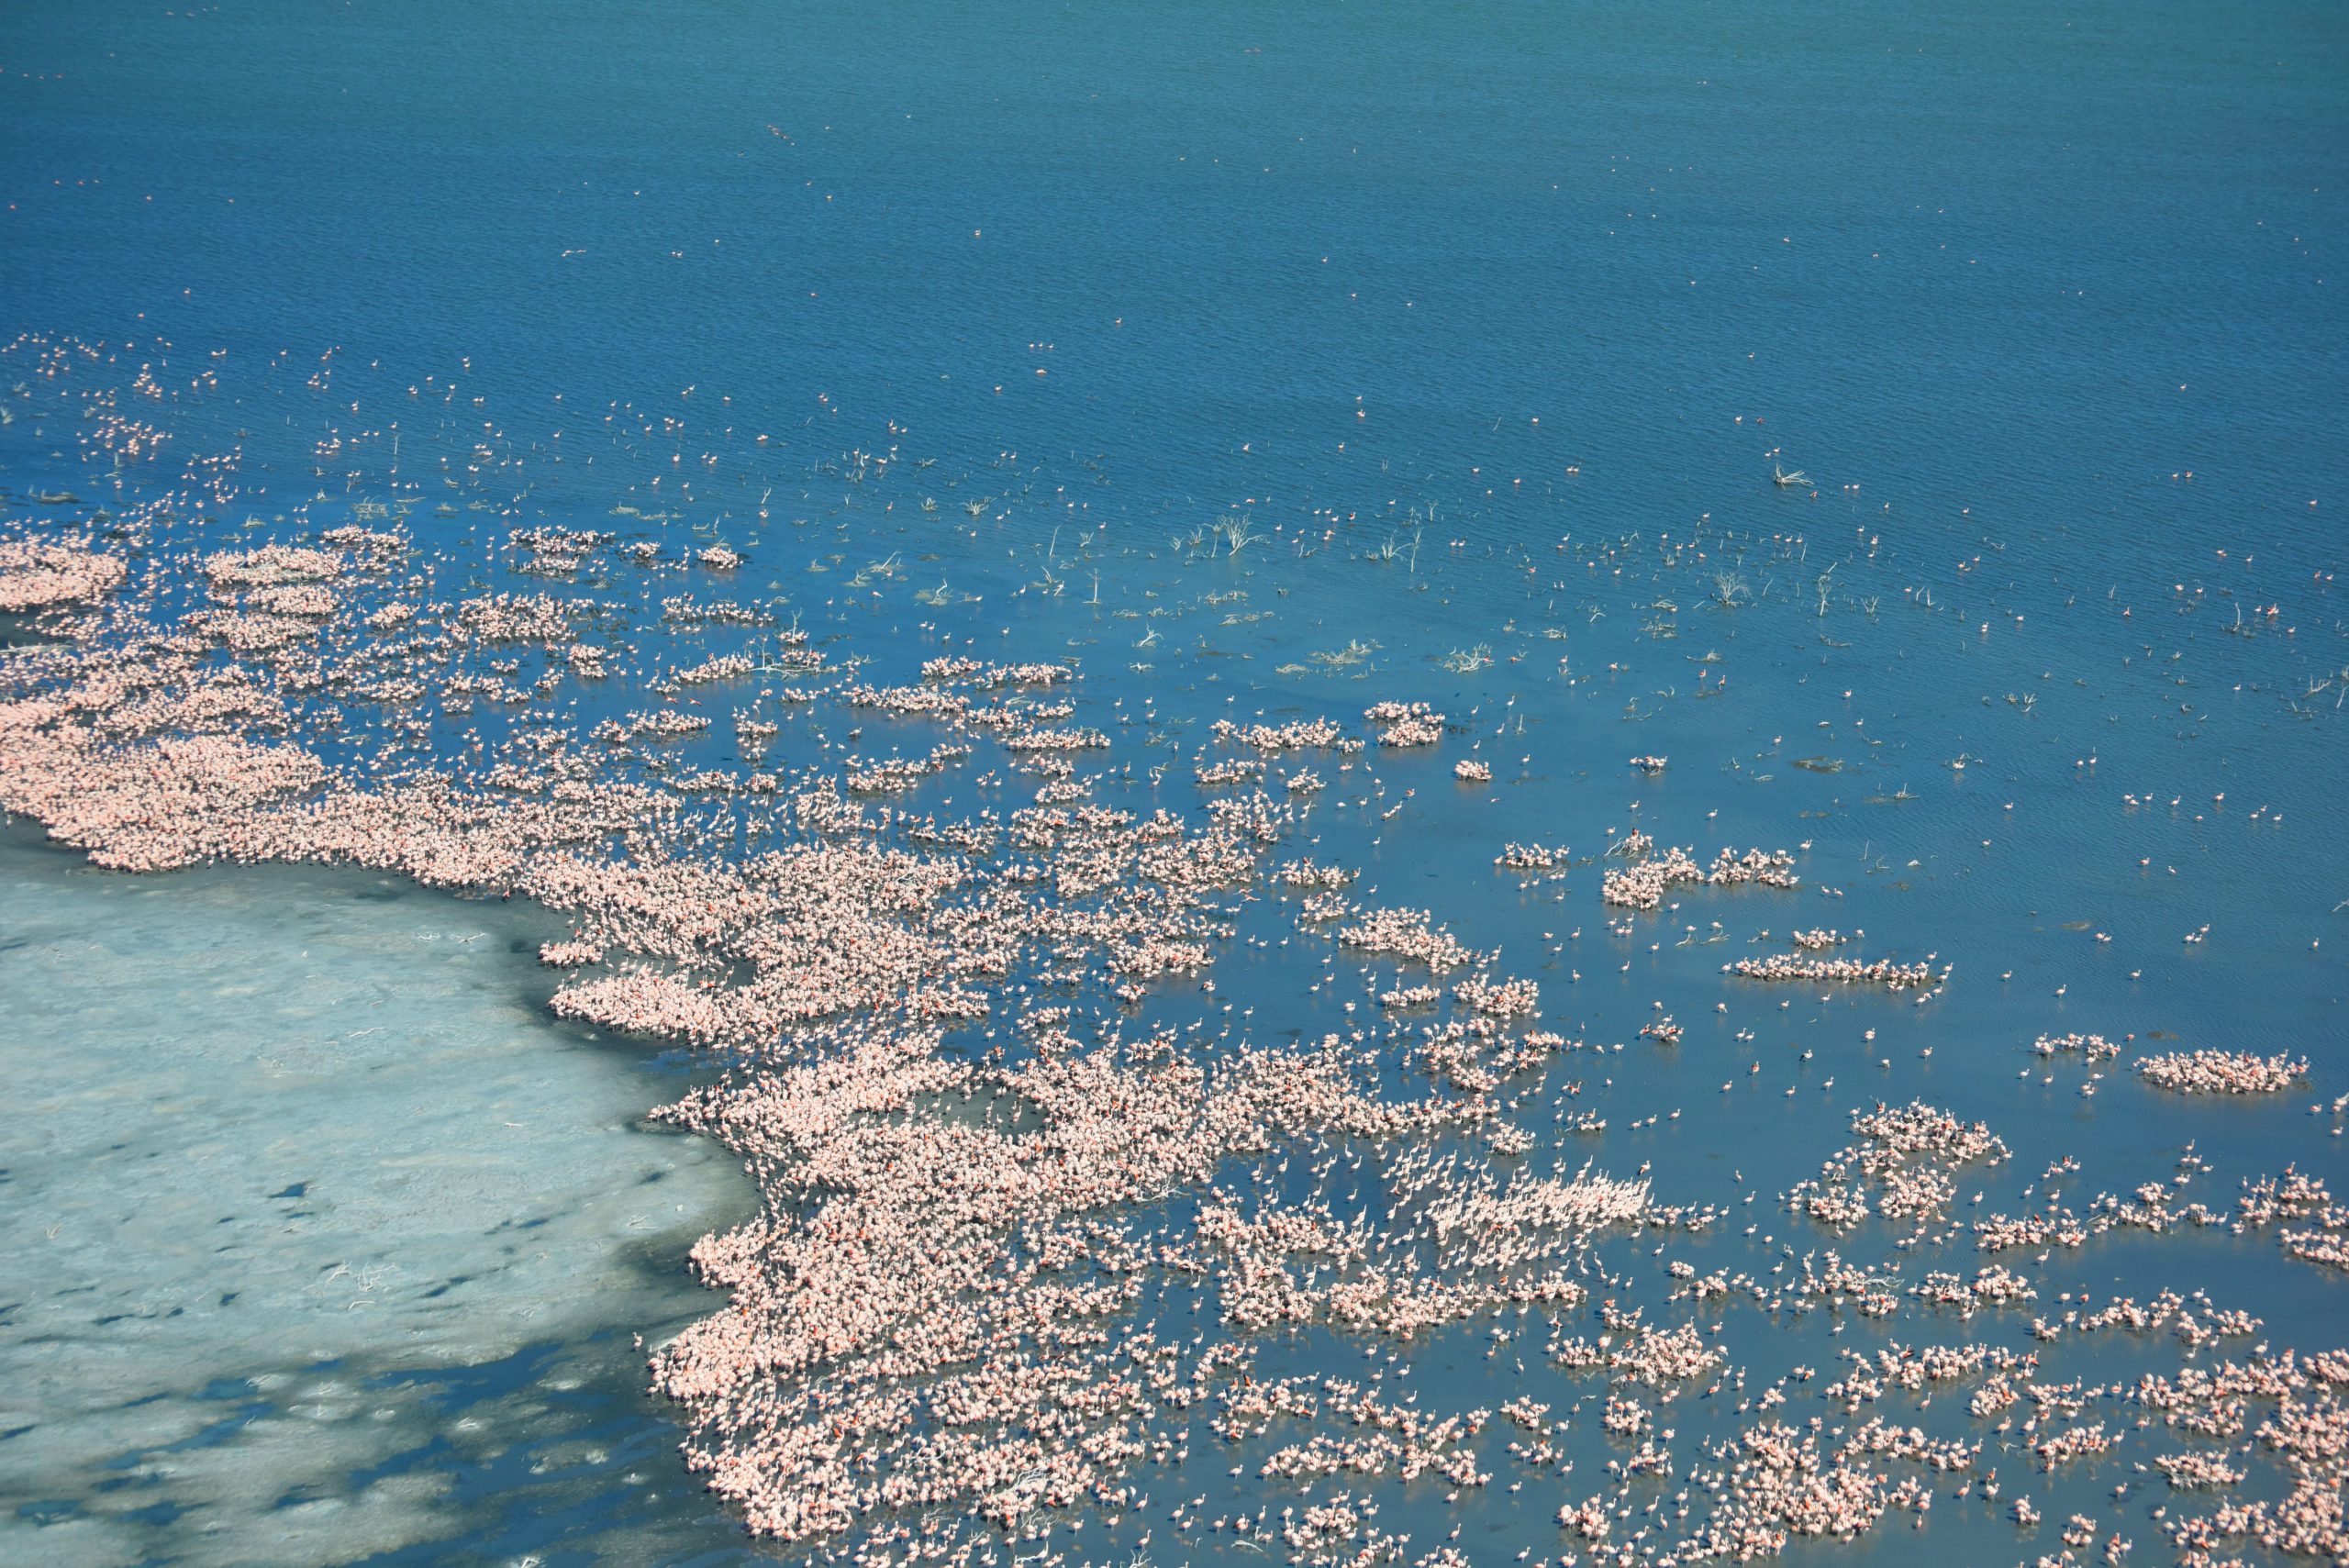 A deep blue lake bordered by a salty edge is dotted with thousands of pink flamingos